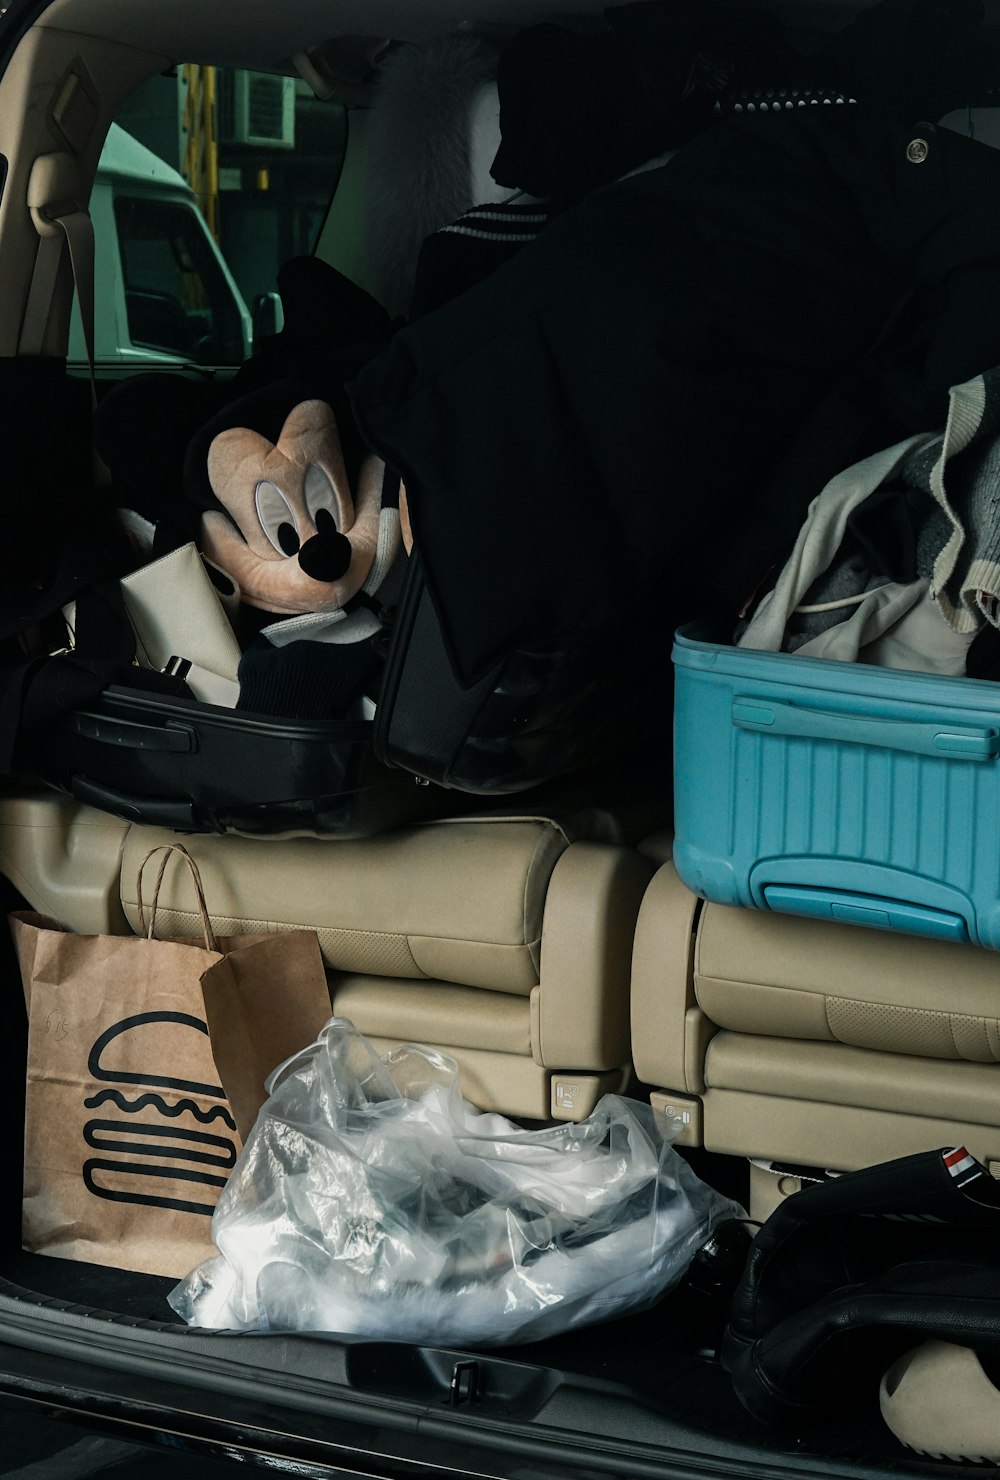 a person in a car with a bag and a bag of trash